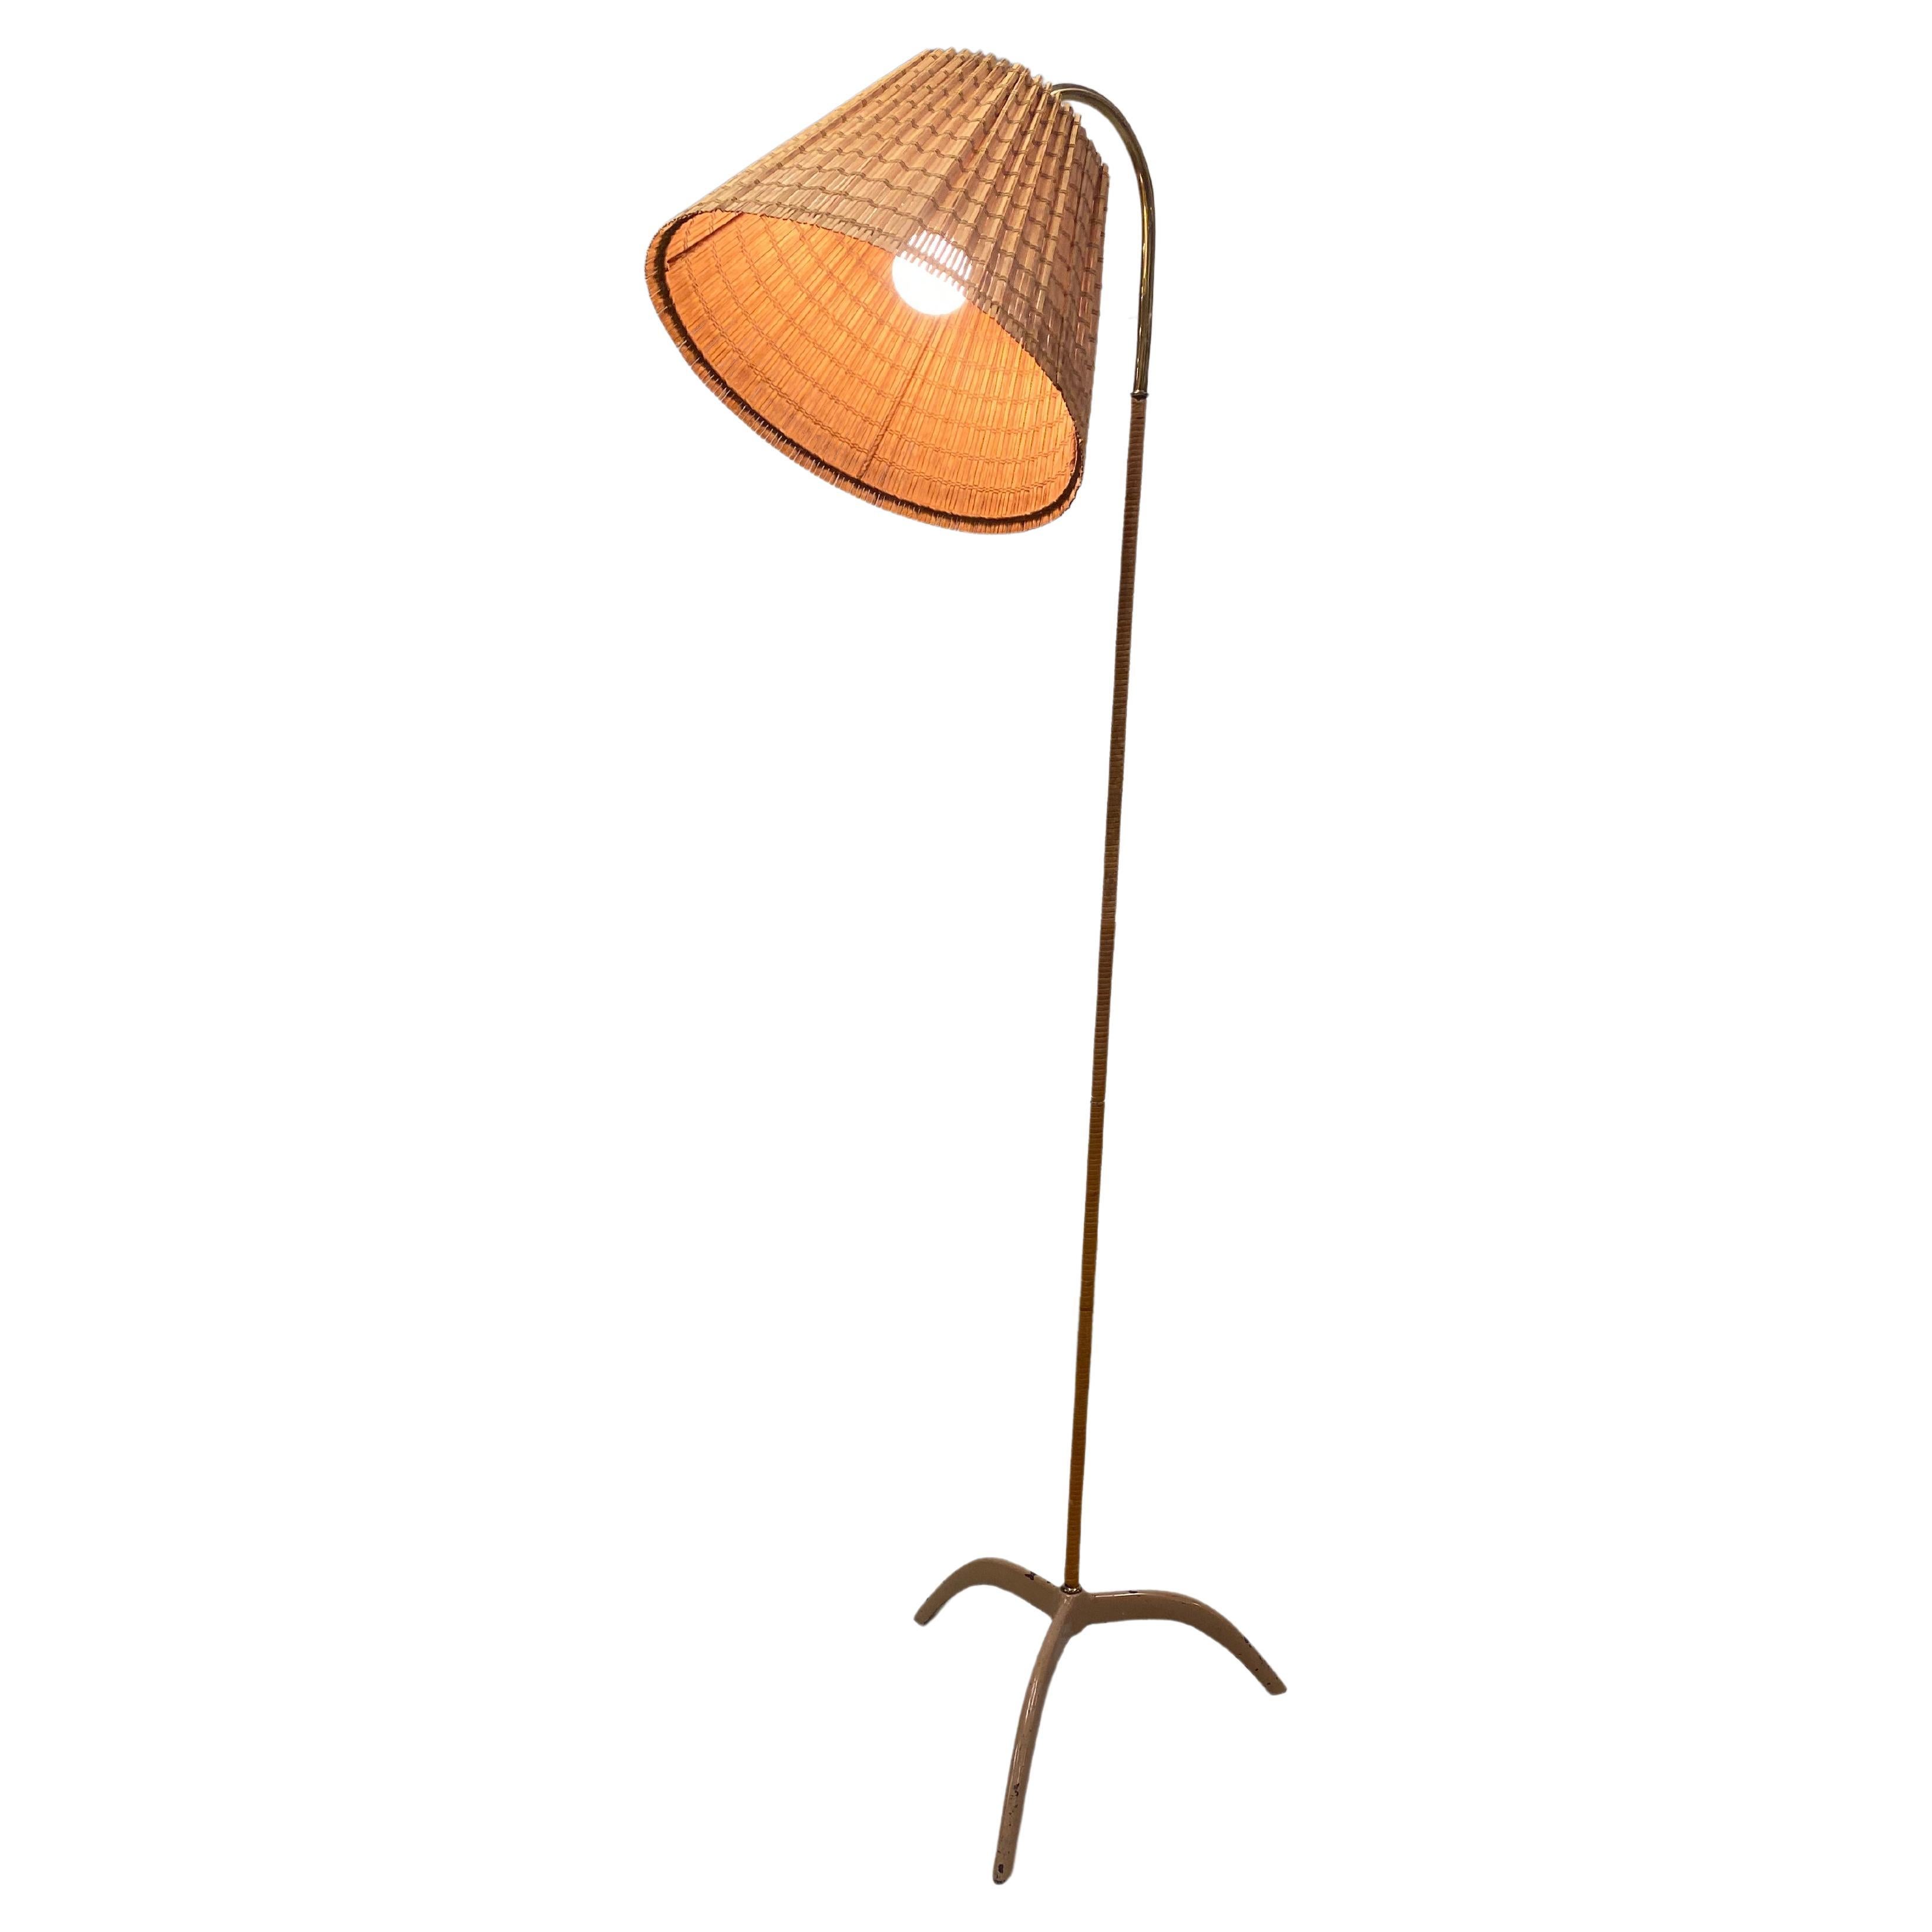 Paavo Tynell (1890-1973) original floor lamp model. 9609, manufactured by Taito Oy in the 1950s.  A beautiful floor lamp with a lacquered metal and rattan stem. All original parts excluding the beautiful renewed rattan shade. The bottom part (often